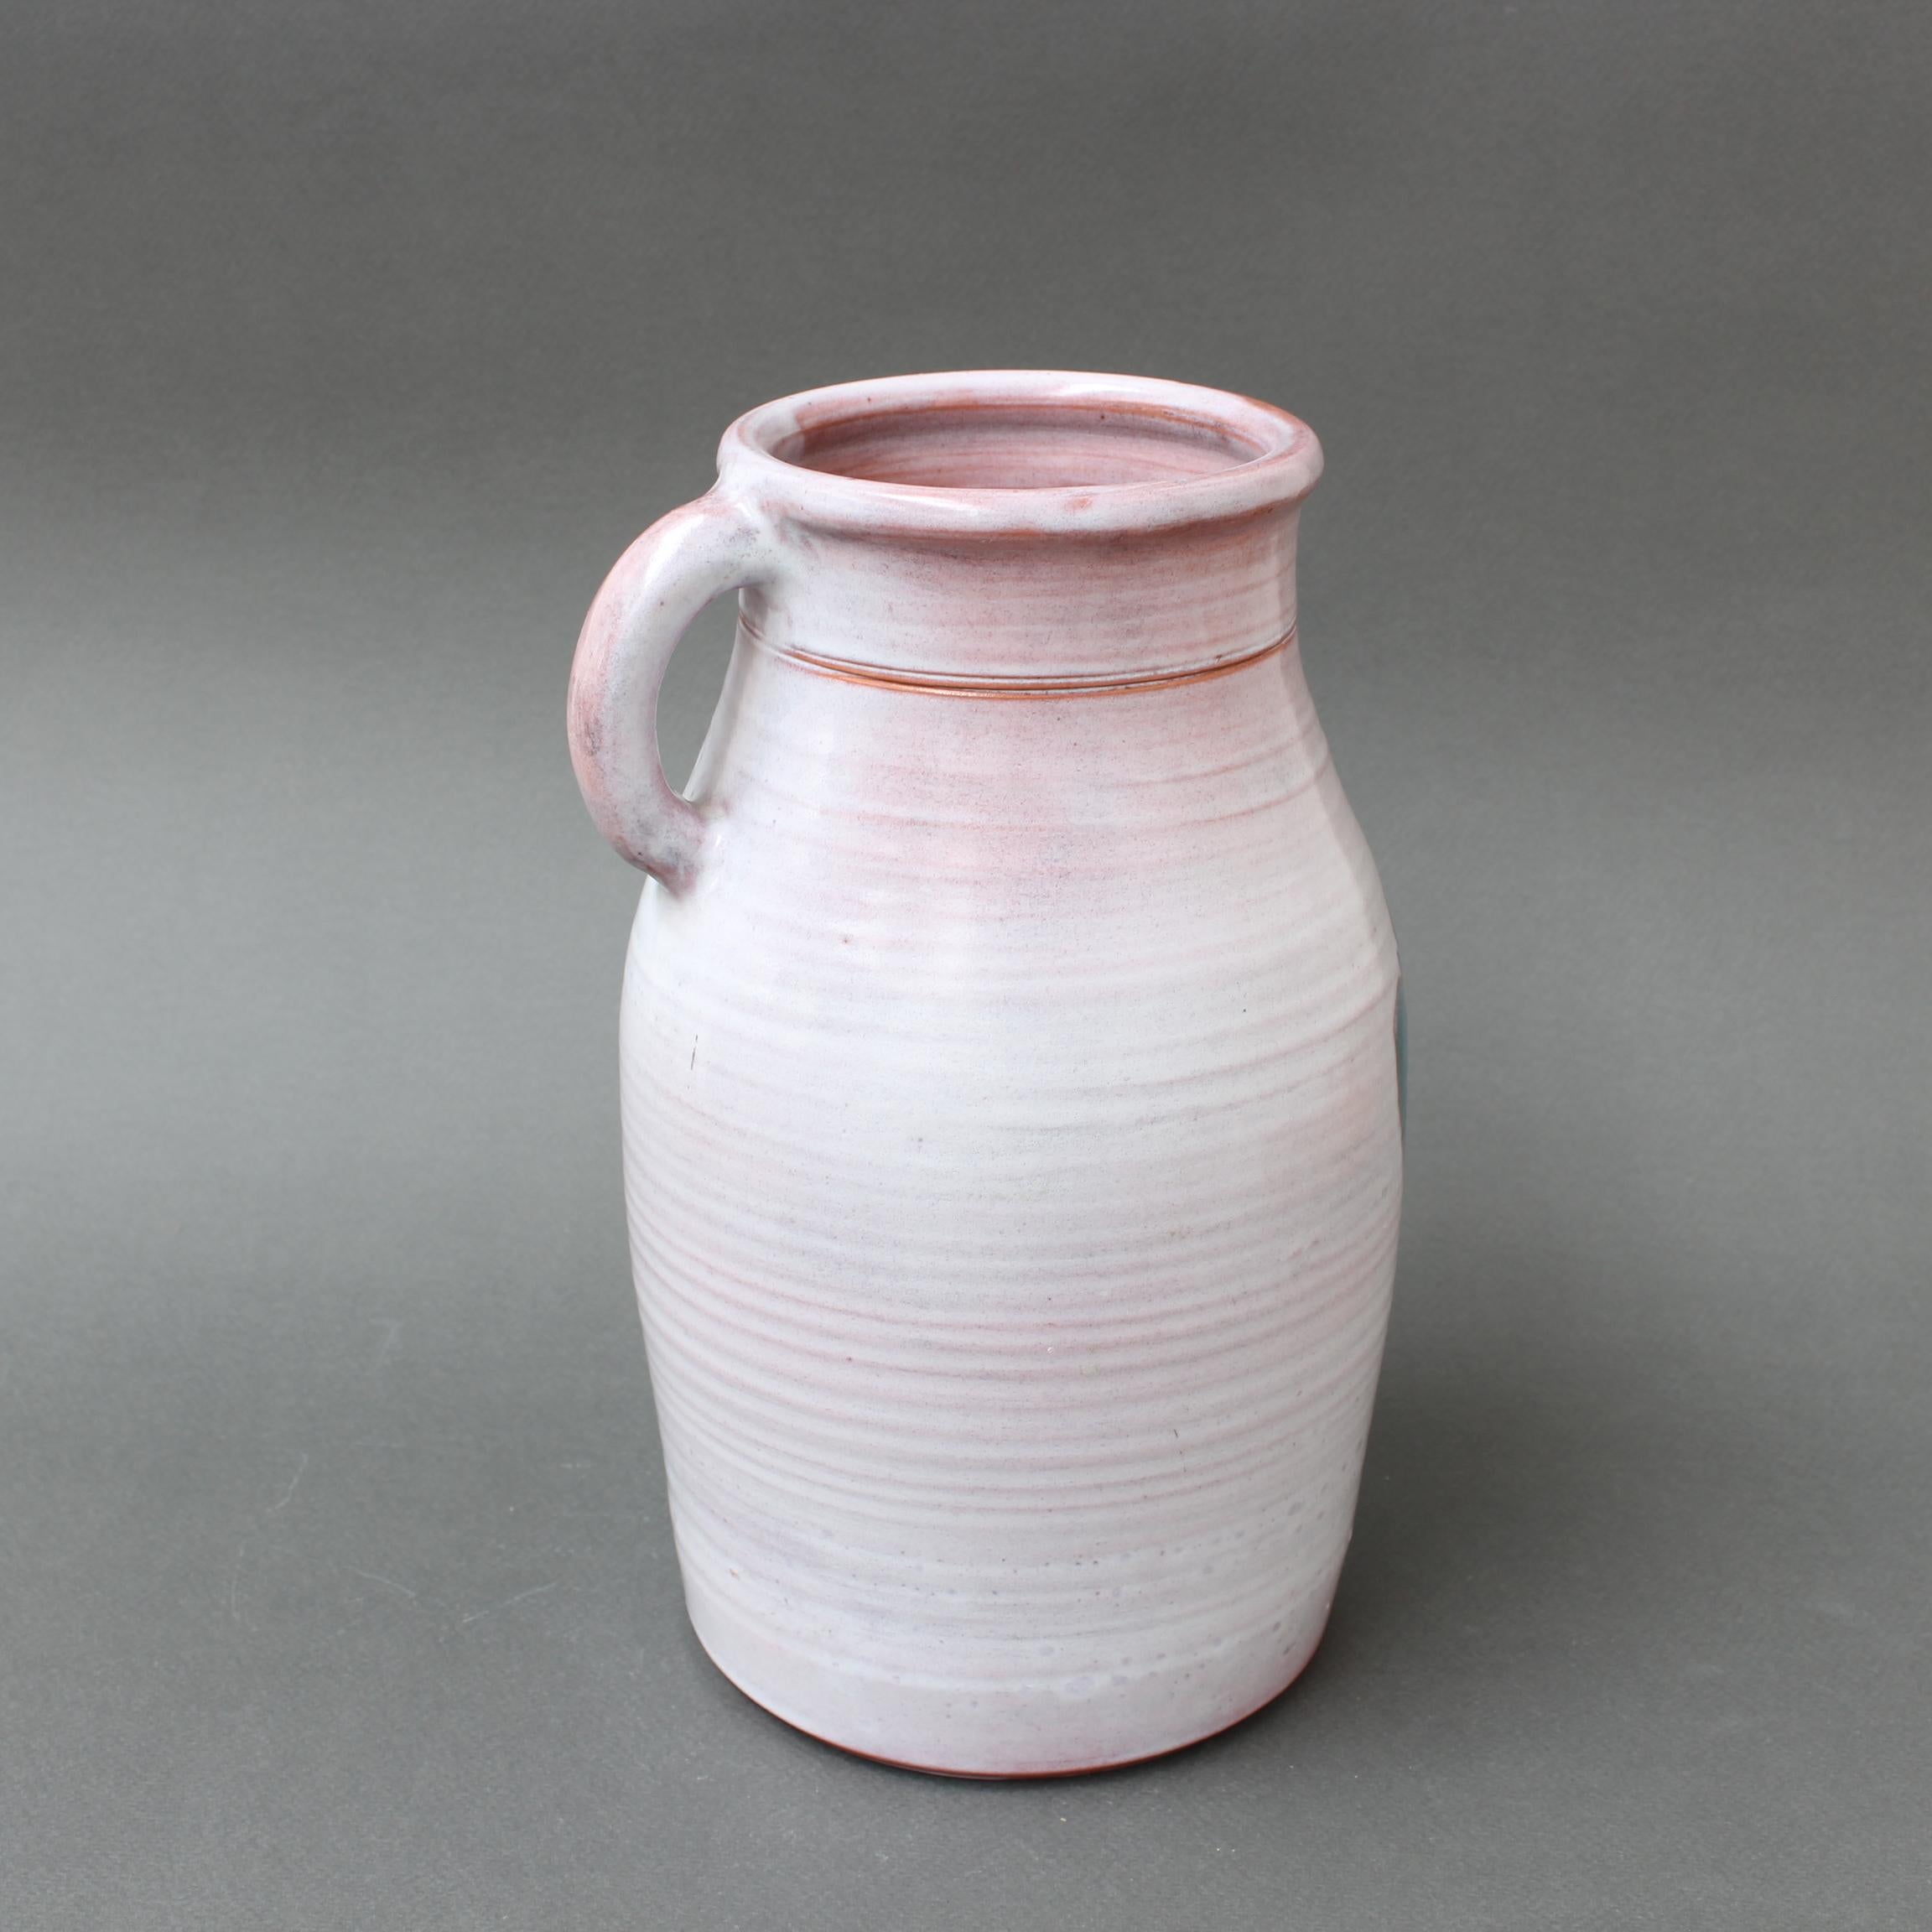 Late 20th Century Vintage French Ceramic Pitcher by Cloutier Brothers (circa 1970s) For Sale